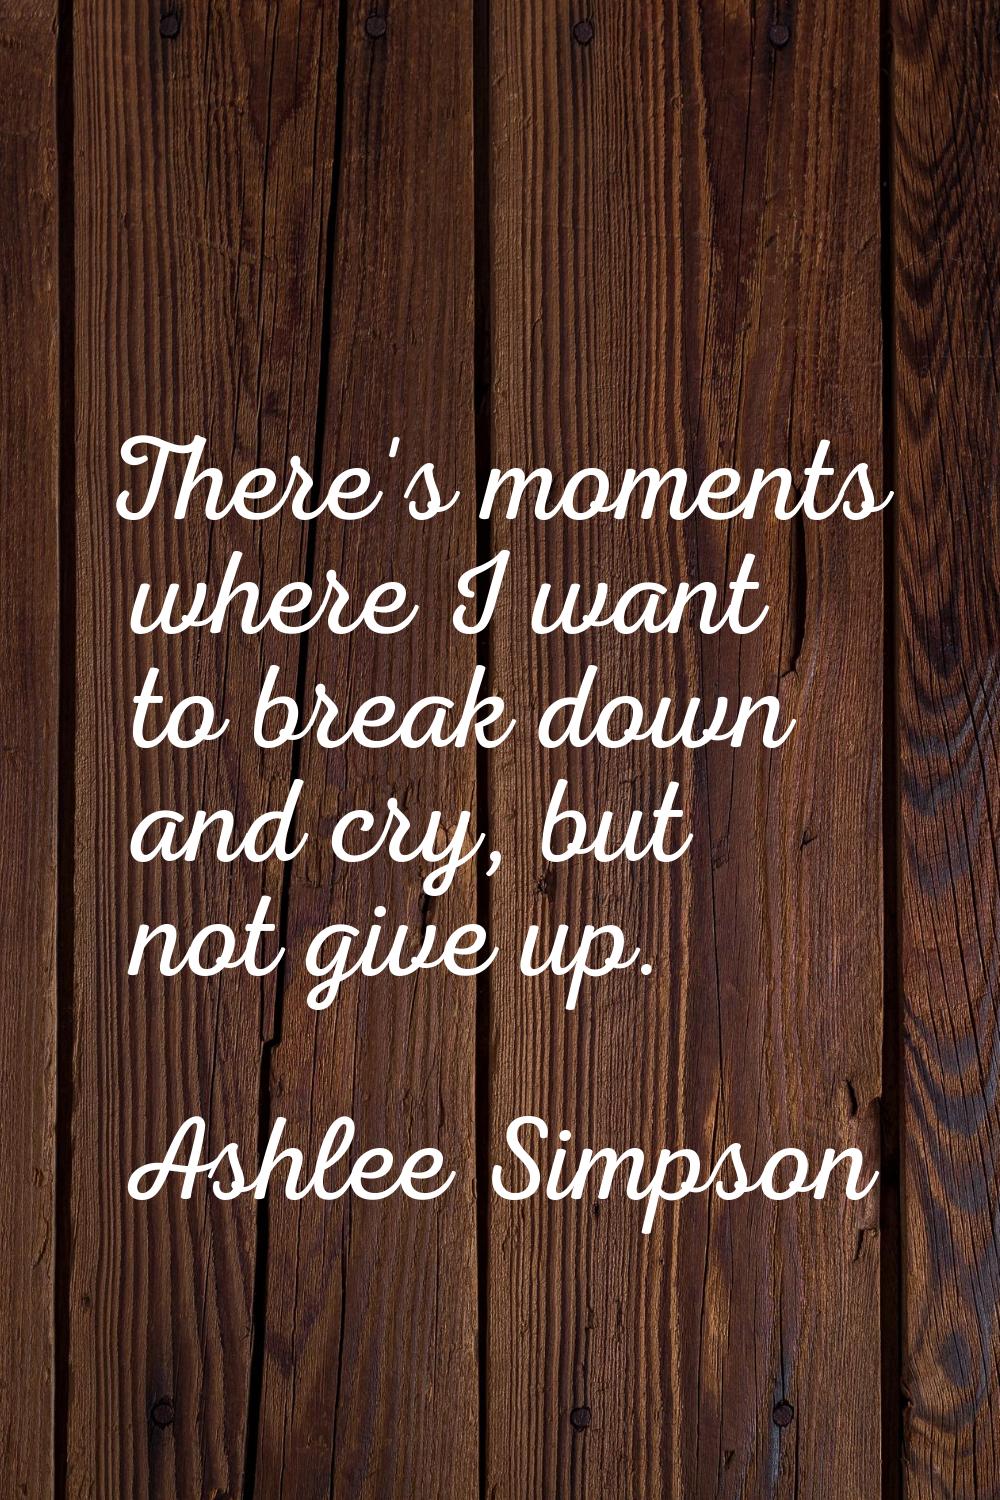 There's moments where I want to break down and cry, but not give up.